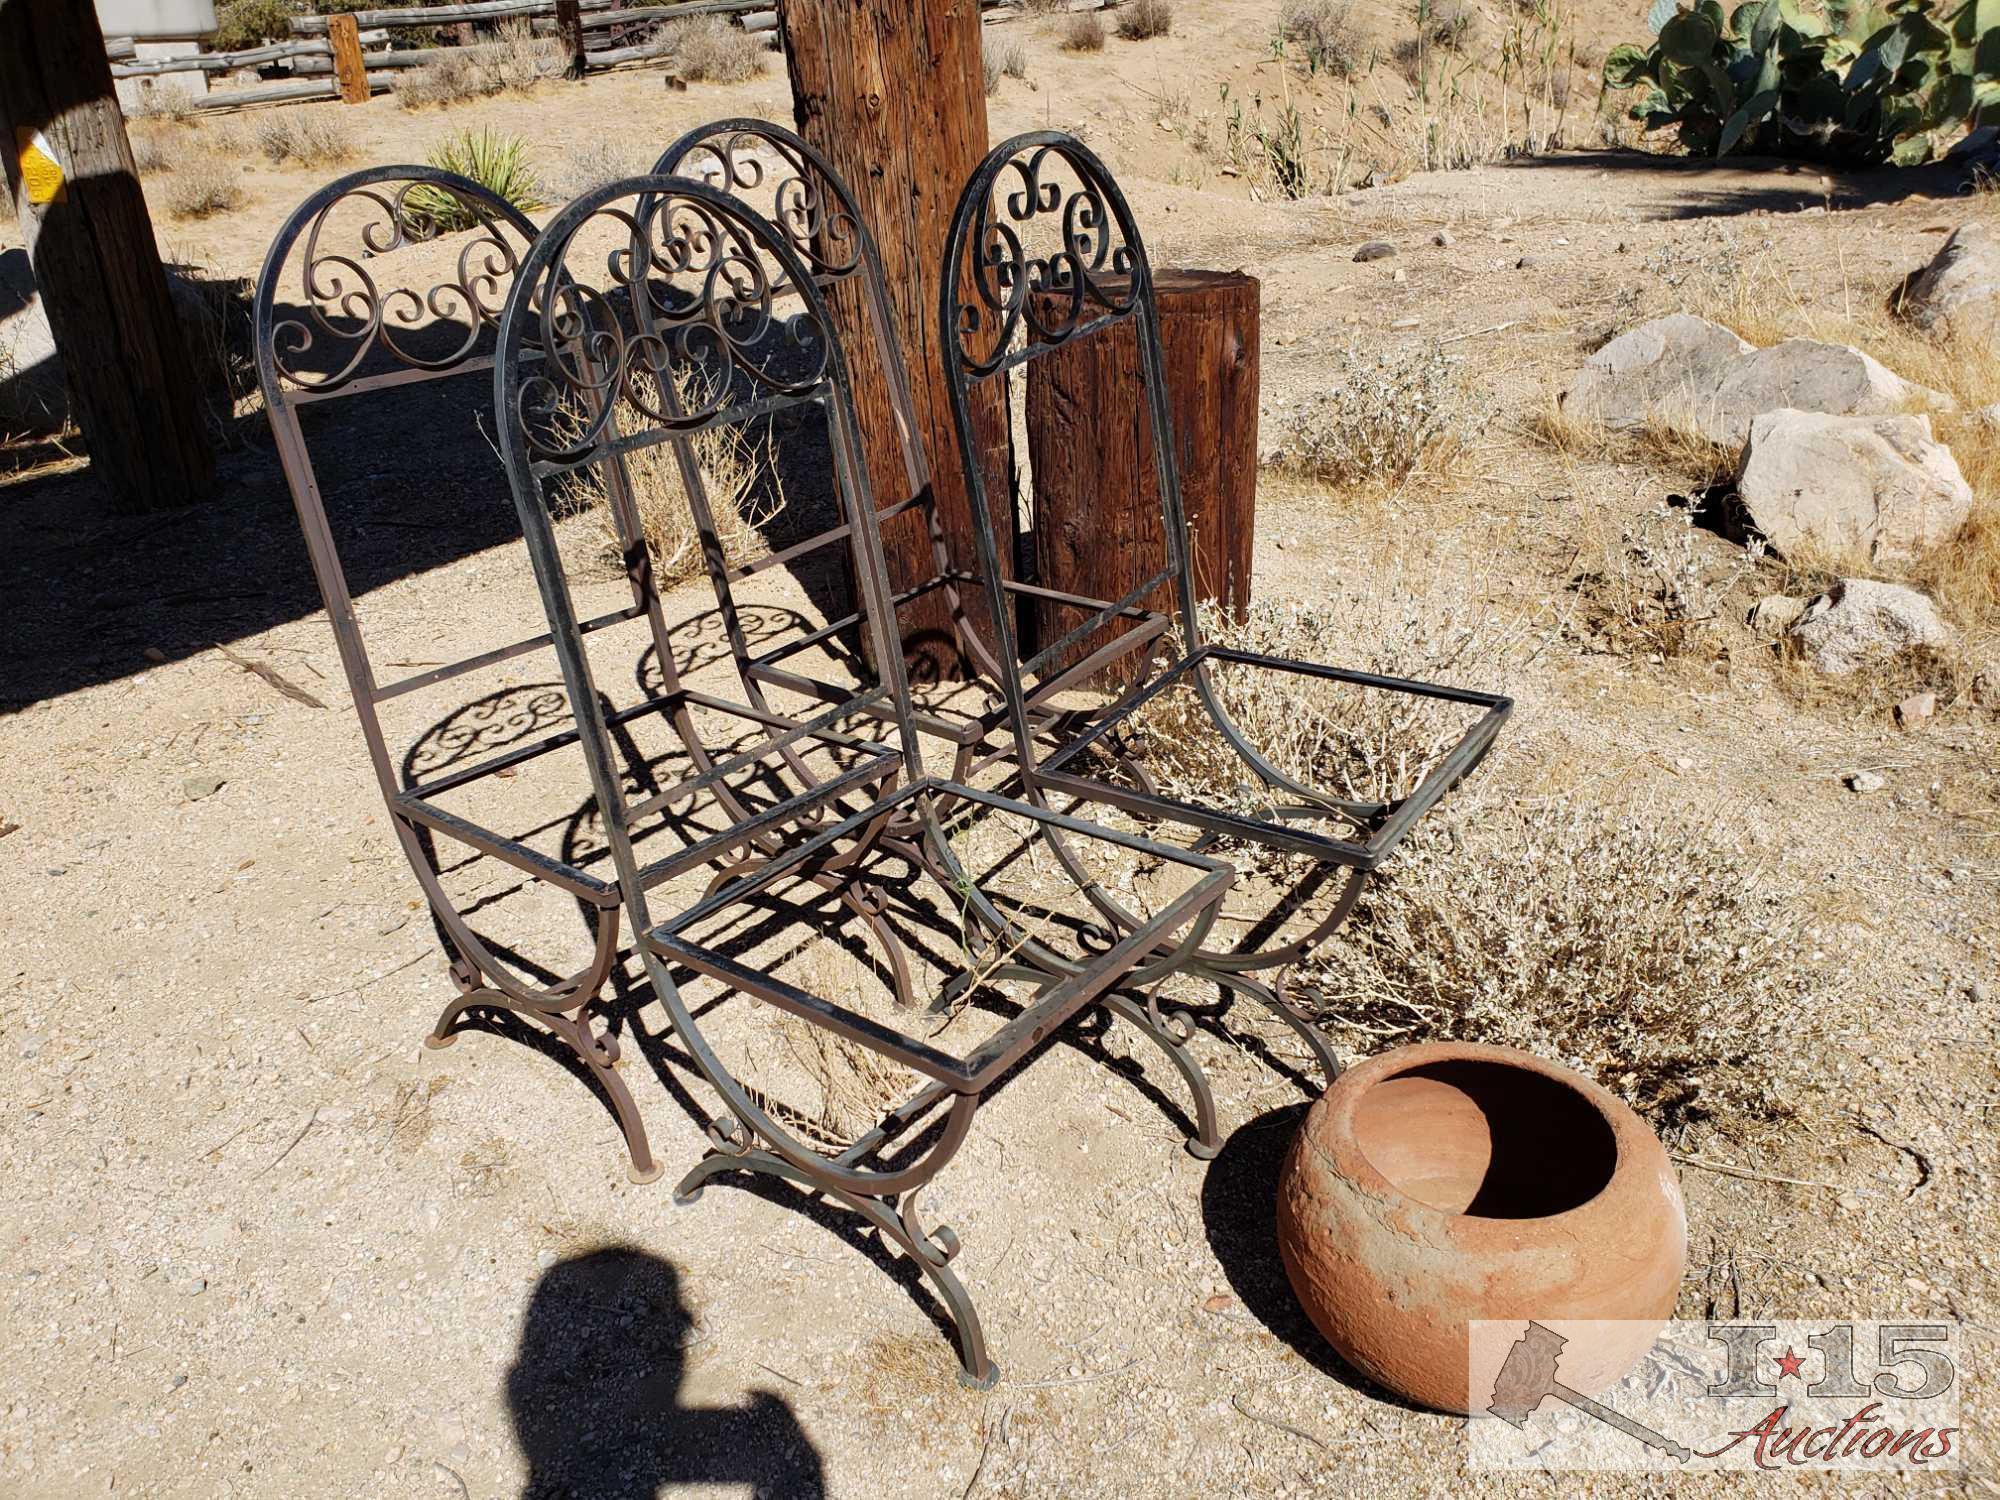 4 Vintage Metal Chairs and 1 Clay Pot